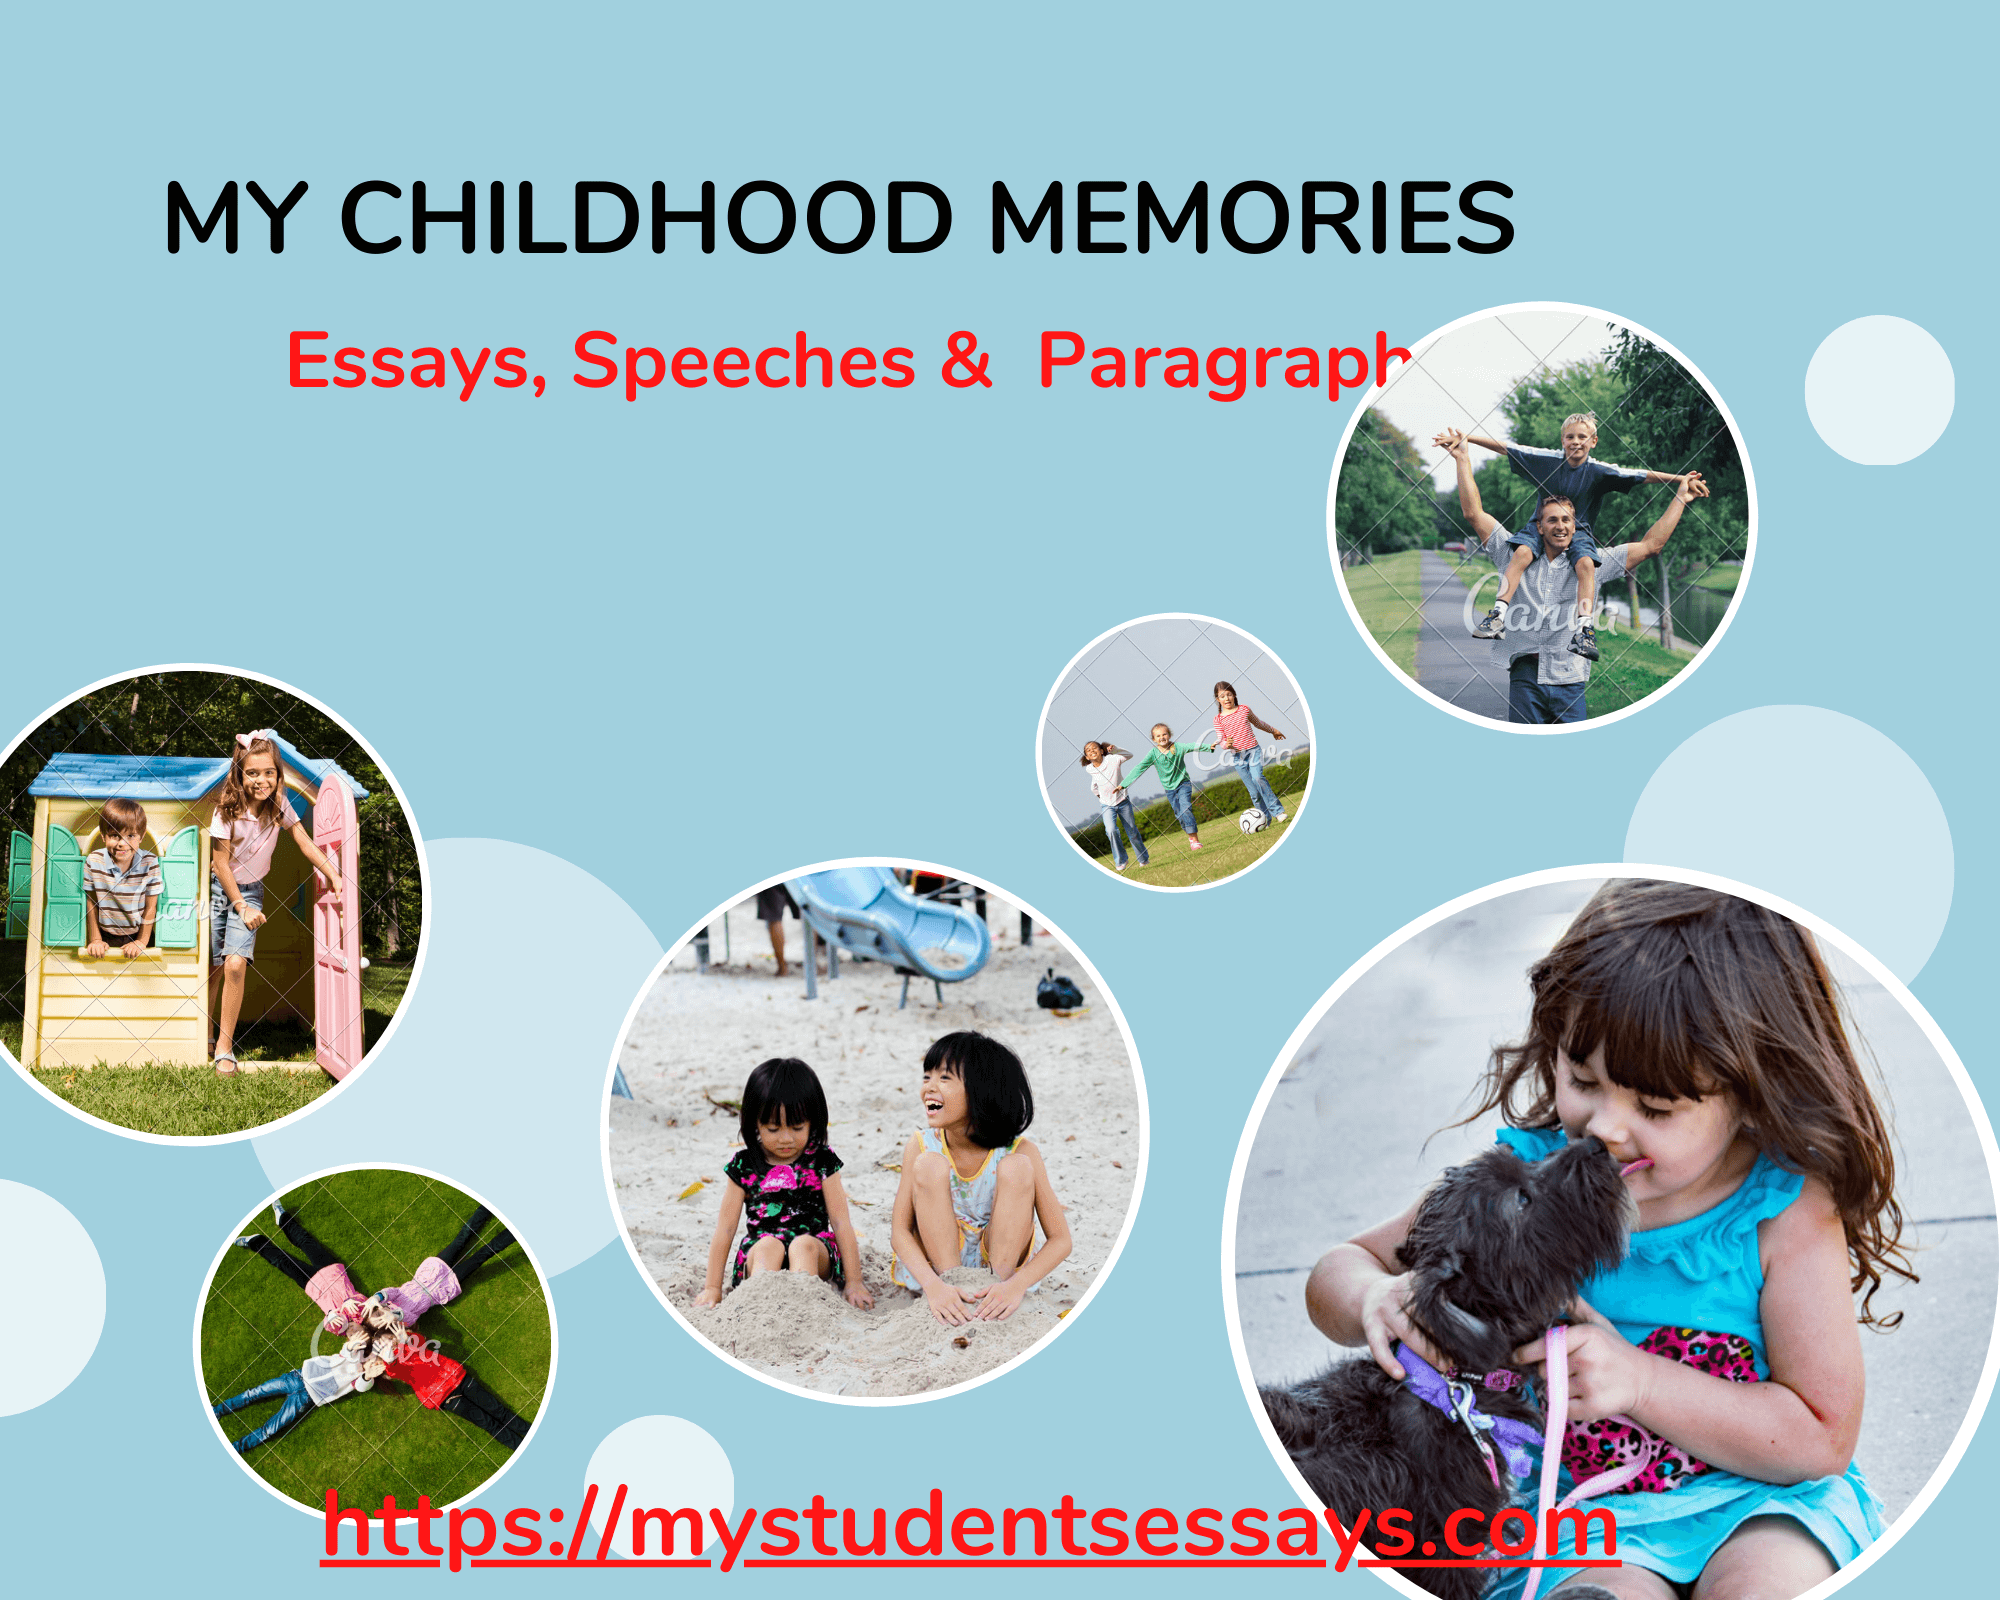 Essay on my childhood memories for children & students